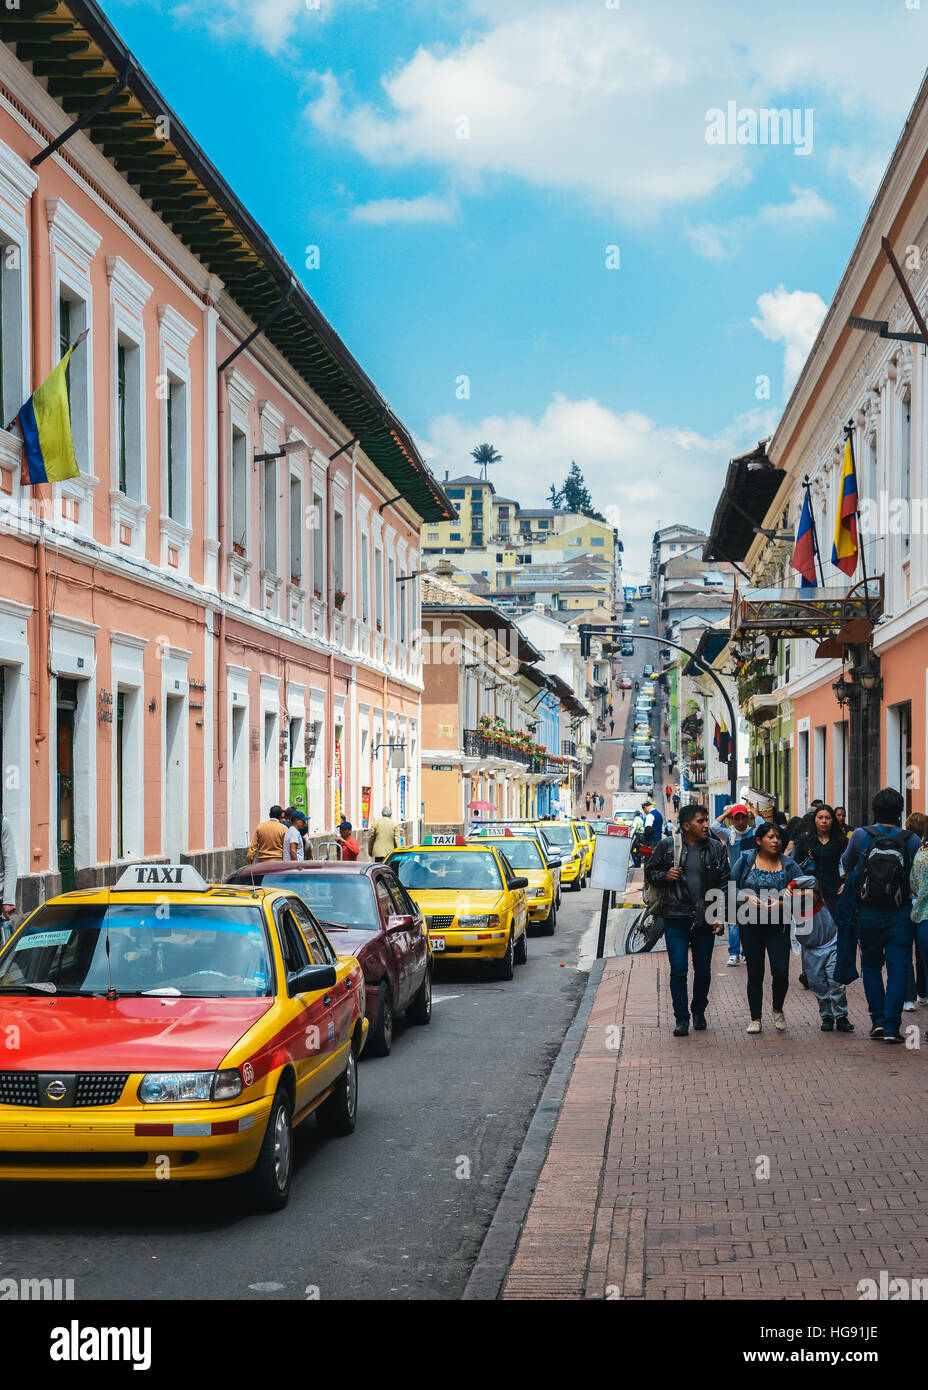 The old historic town of Quito (Unesco World Heritage Site) in Ecuador with its traditional yellow taxis Stock Photo